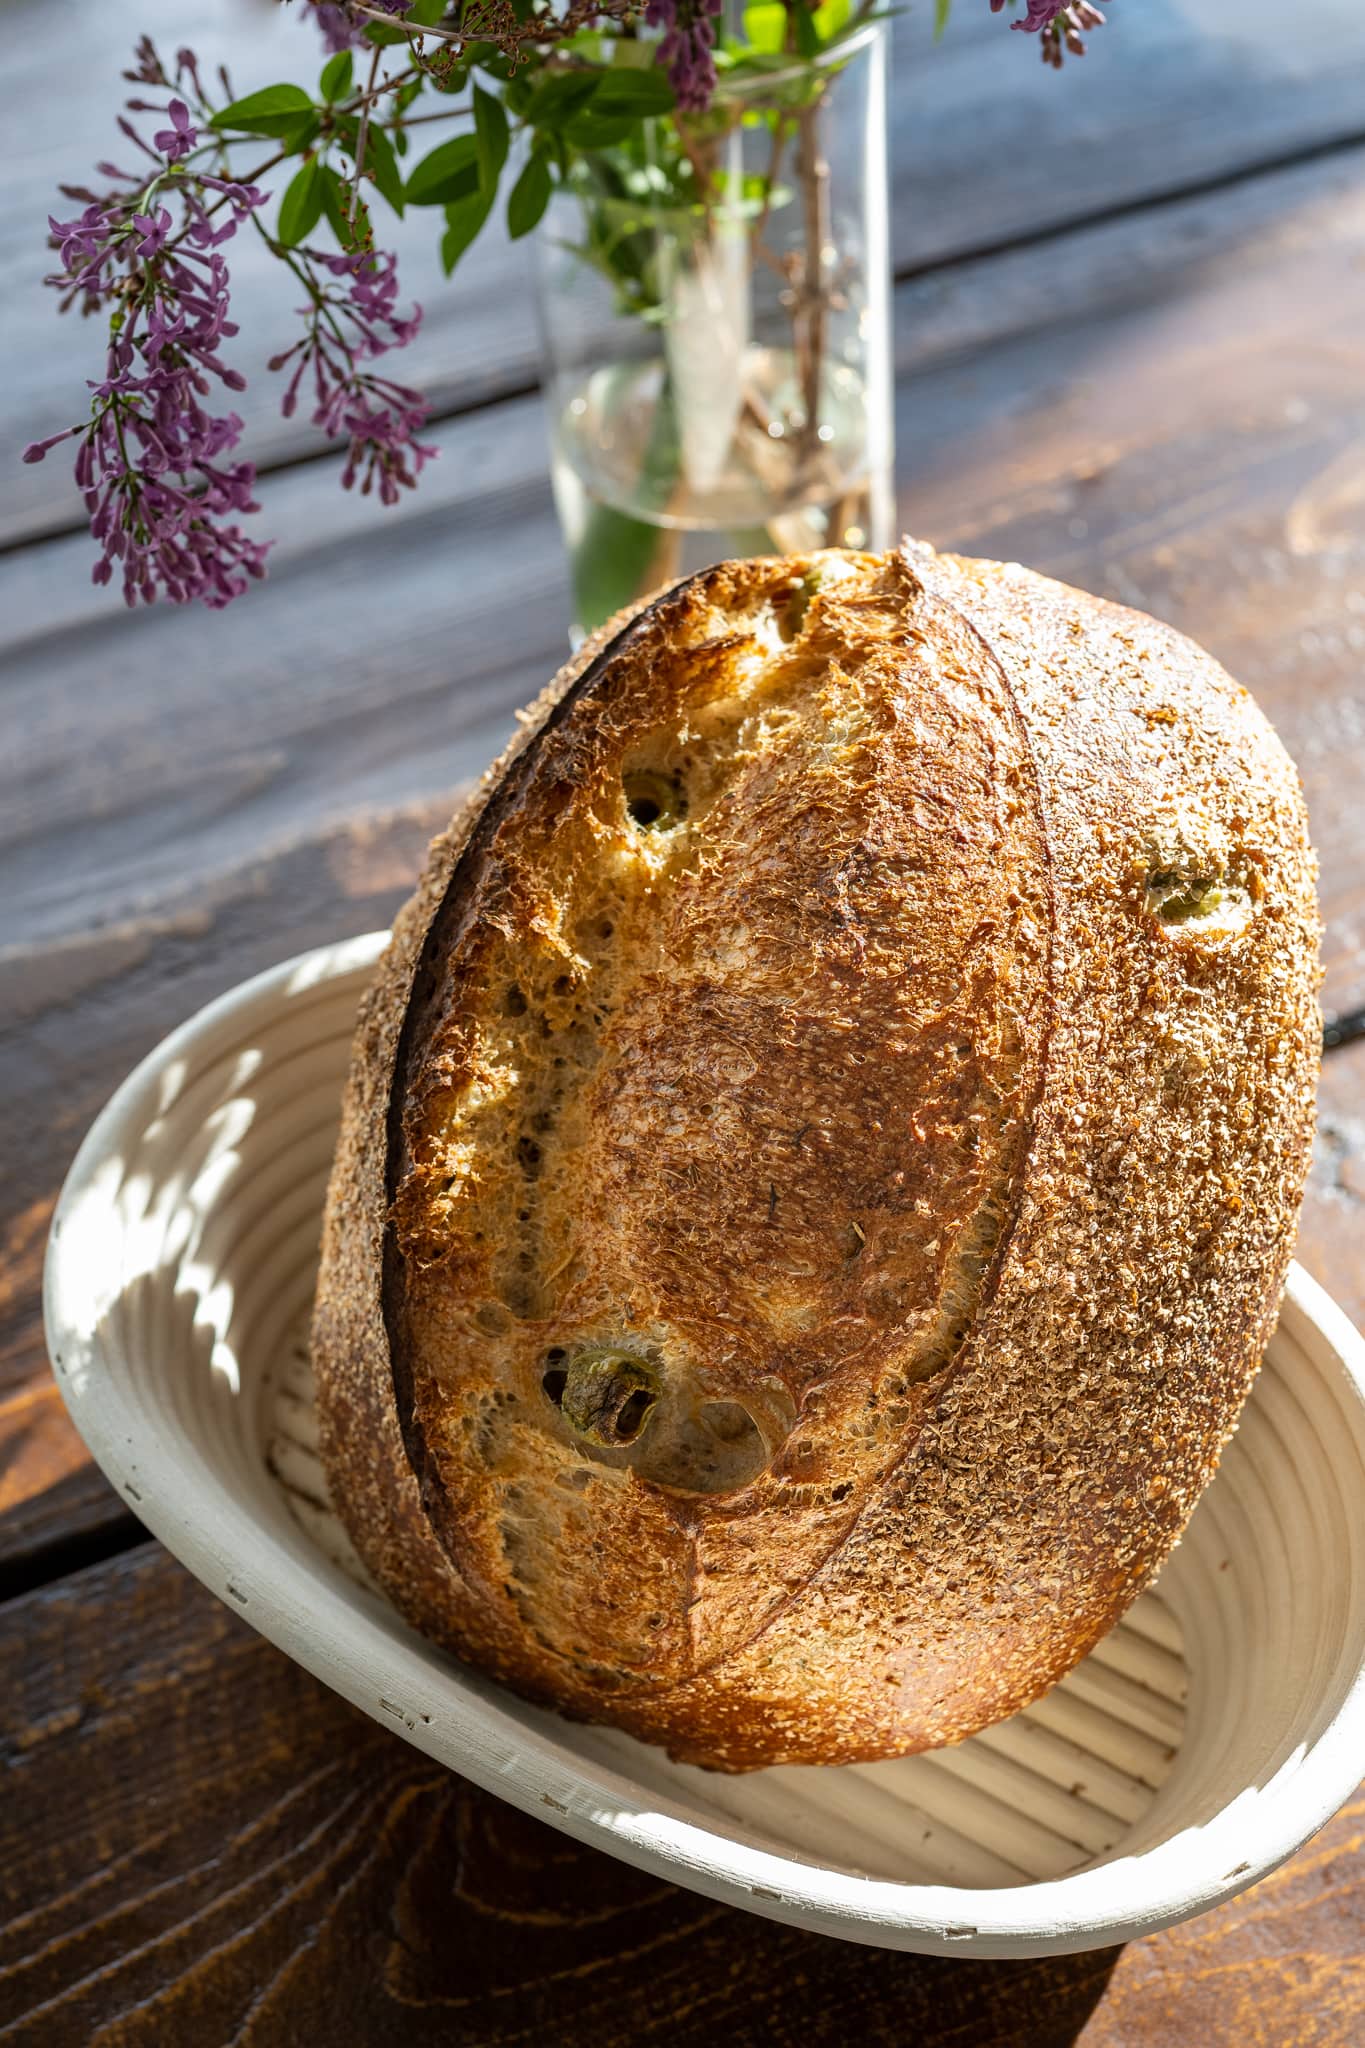 https://www.theperfectloaf.com/wp-content/uploads/2021/05/theperfectloaf-green-olive-and-herb-sourdough-bread-8.jpg